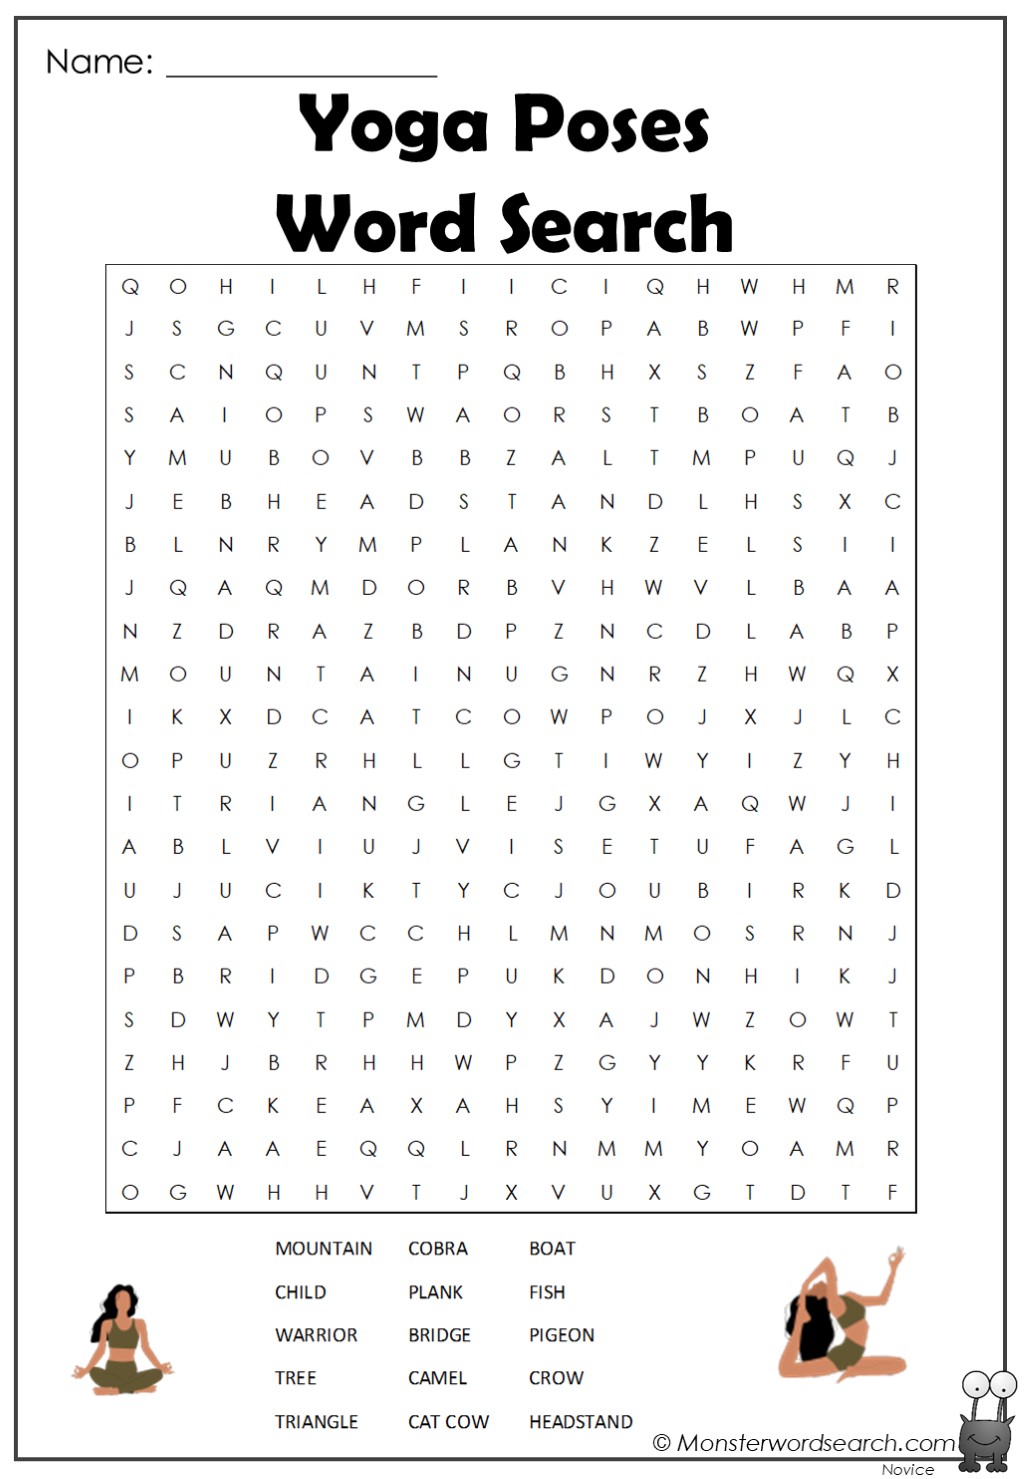 Yoga poses Word Search - Monster Word Search